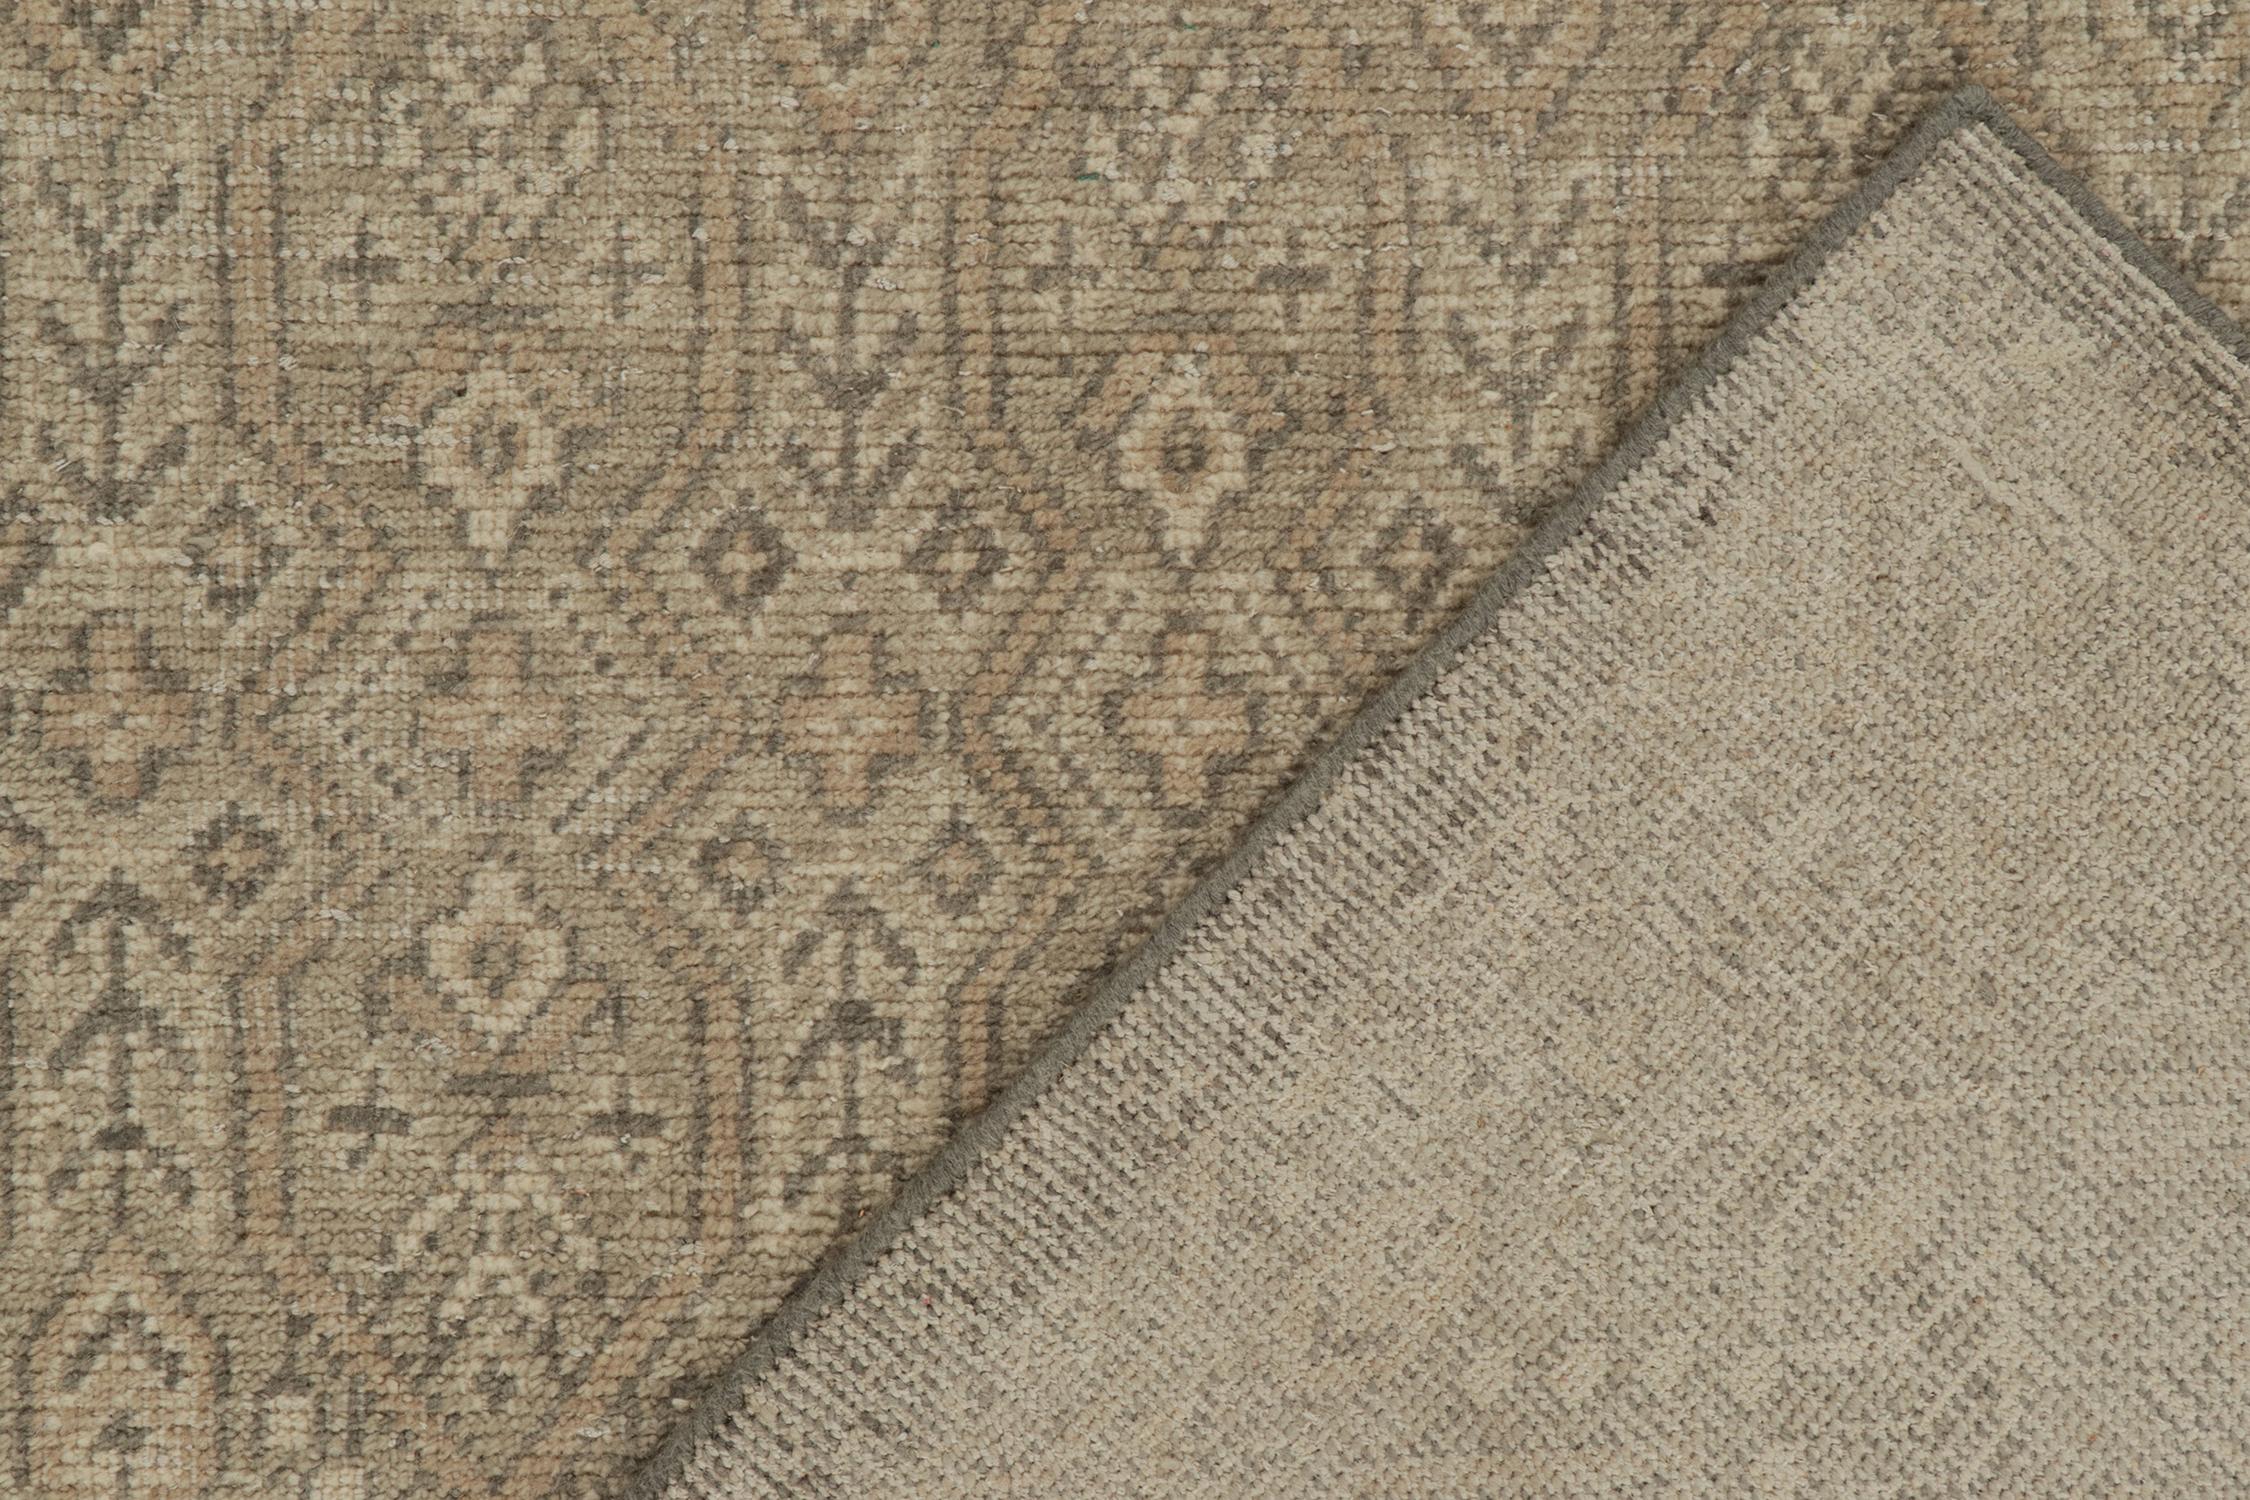 Contemporary Rug & Kilim’s Distressed Tribal style rug in Beige and Gray Geometric Patterns For Sale